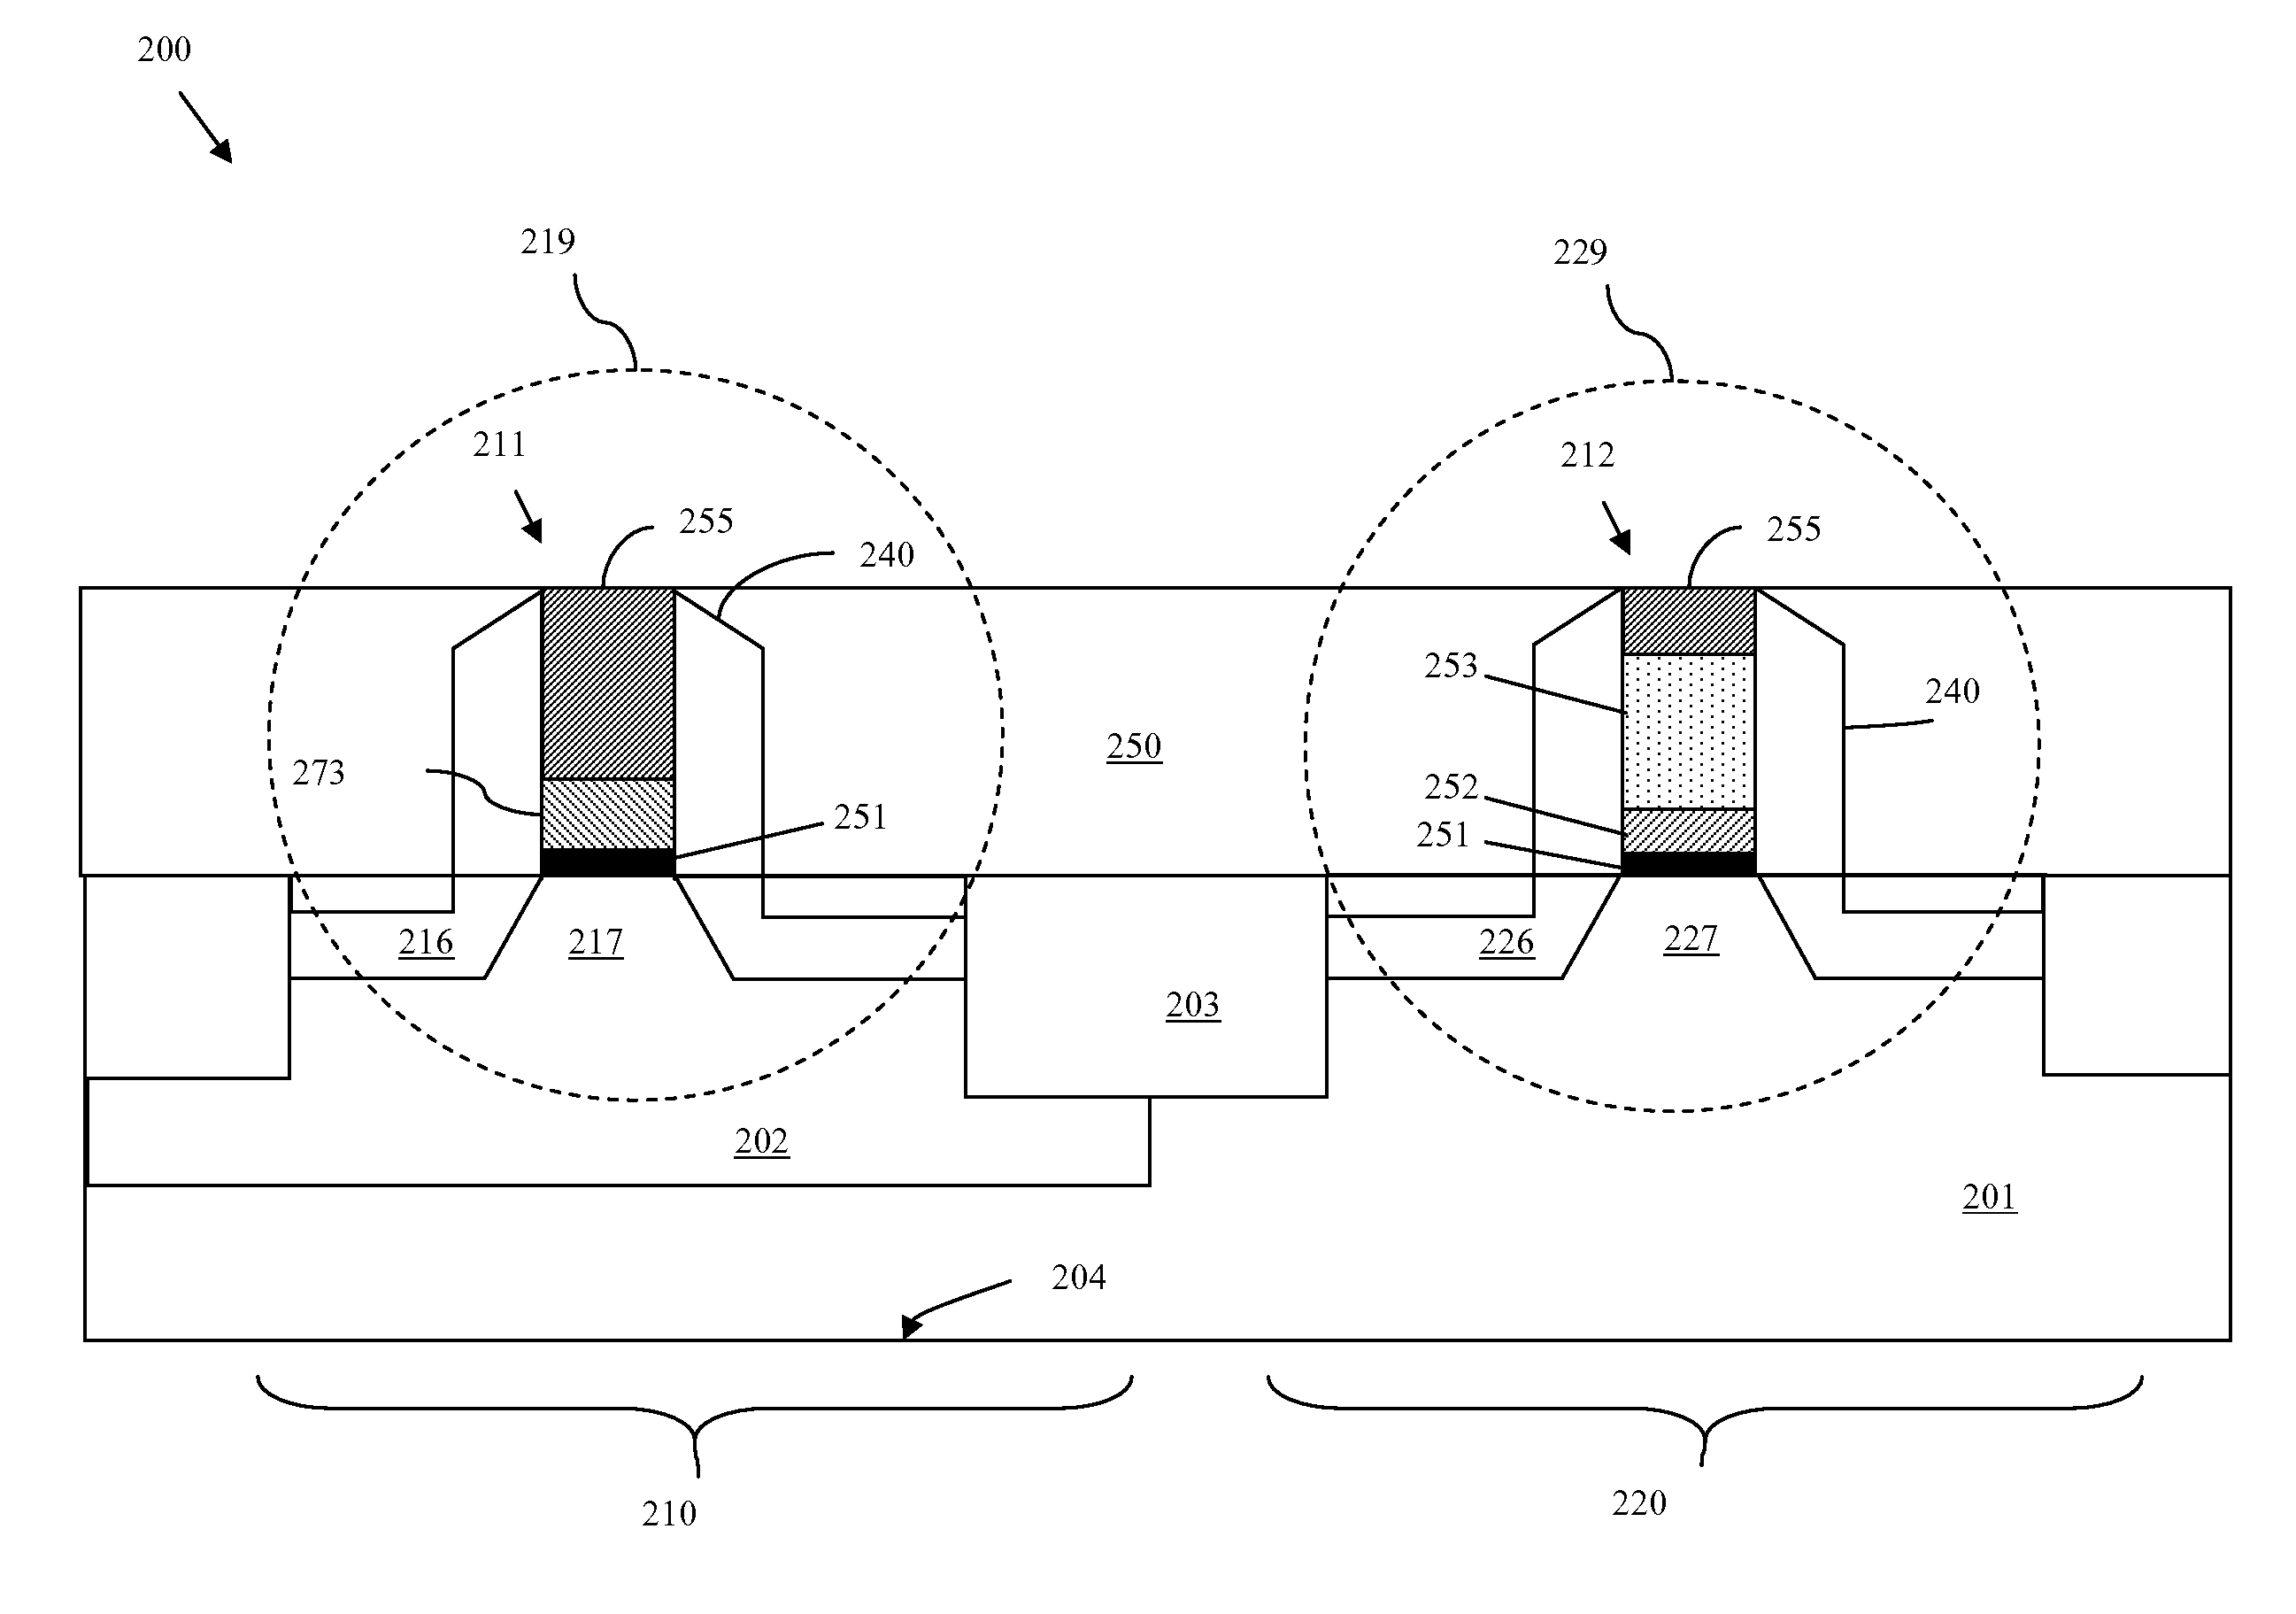 Complementary metal oxide semiconductor device with an electroplated metal replacement gate